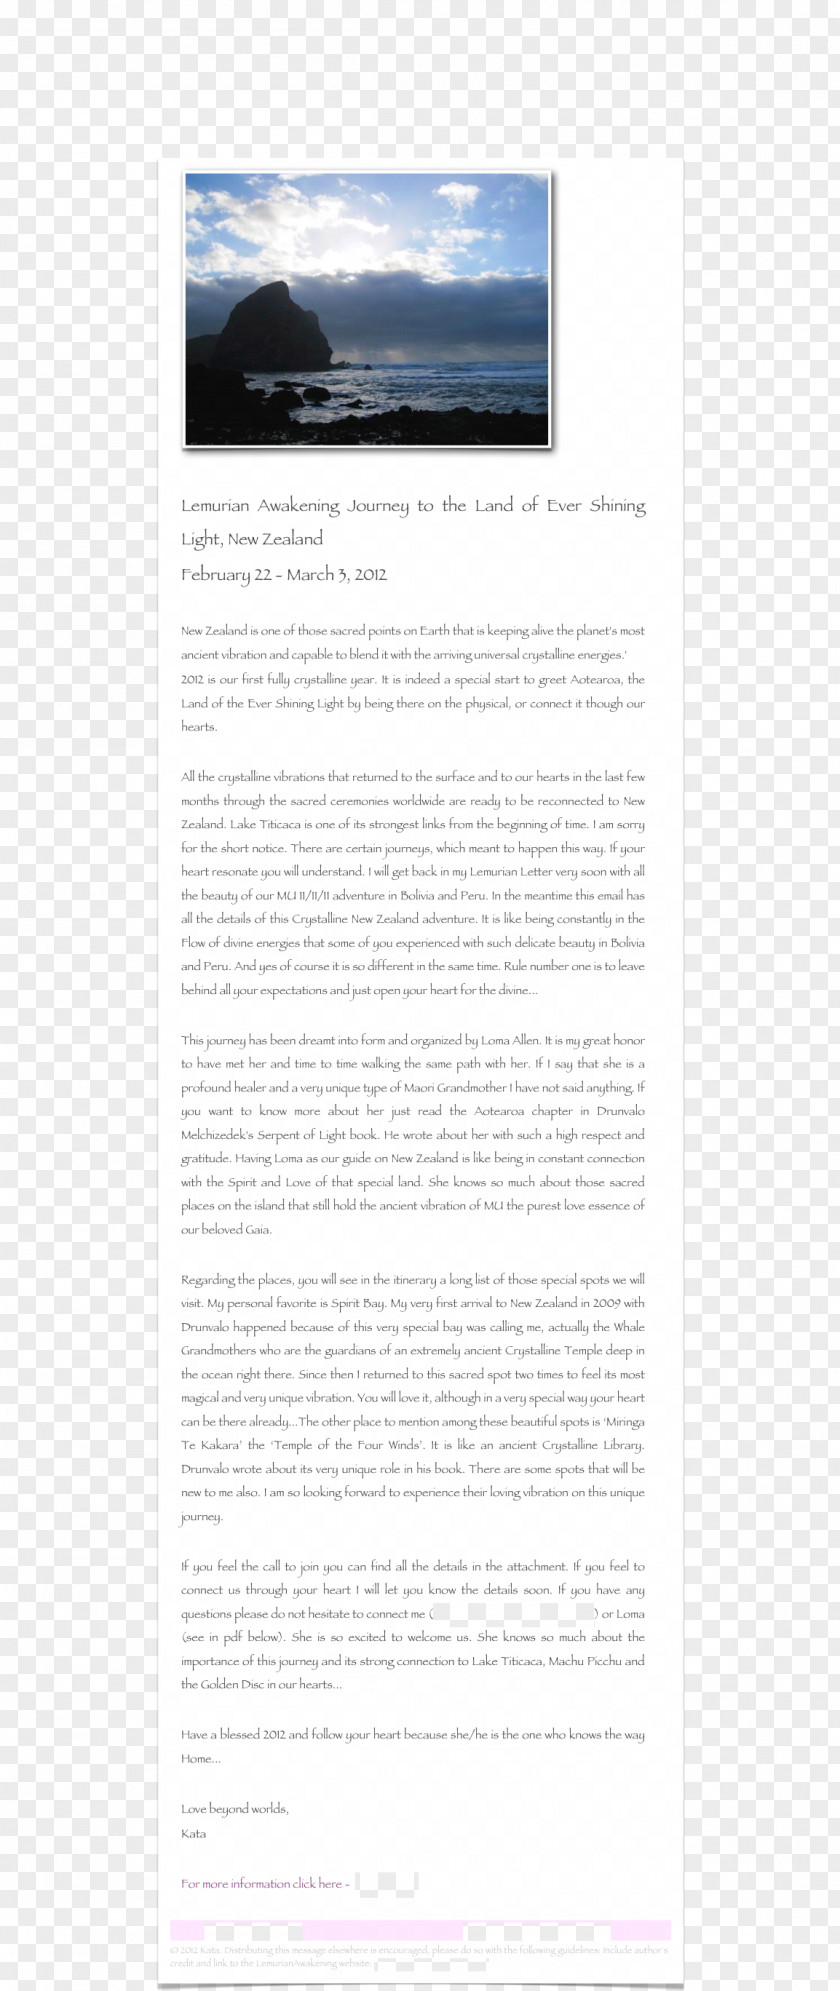 The Long Journey Document Font PNG